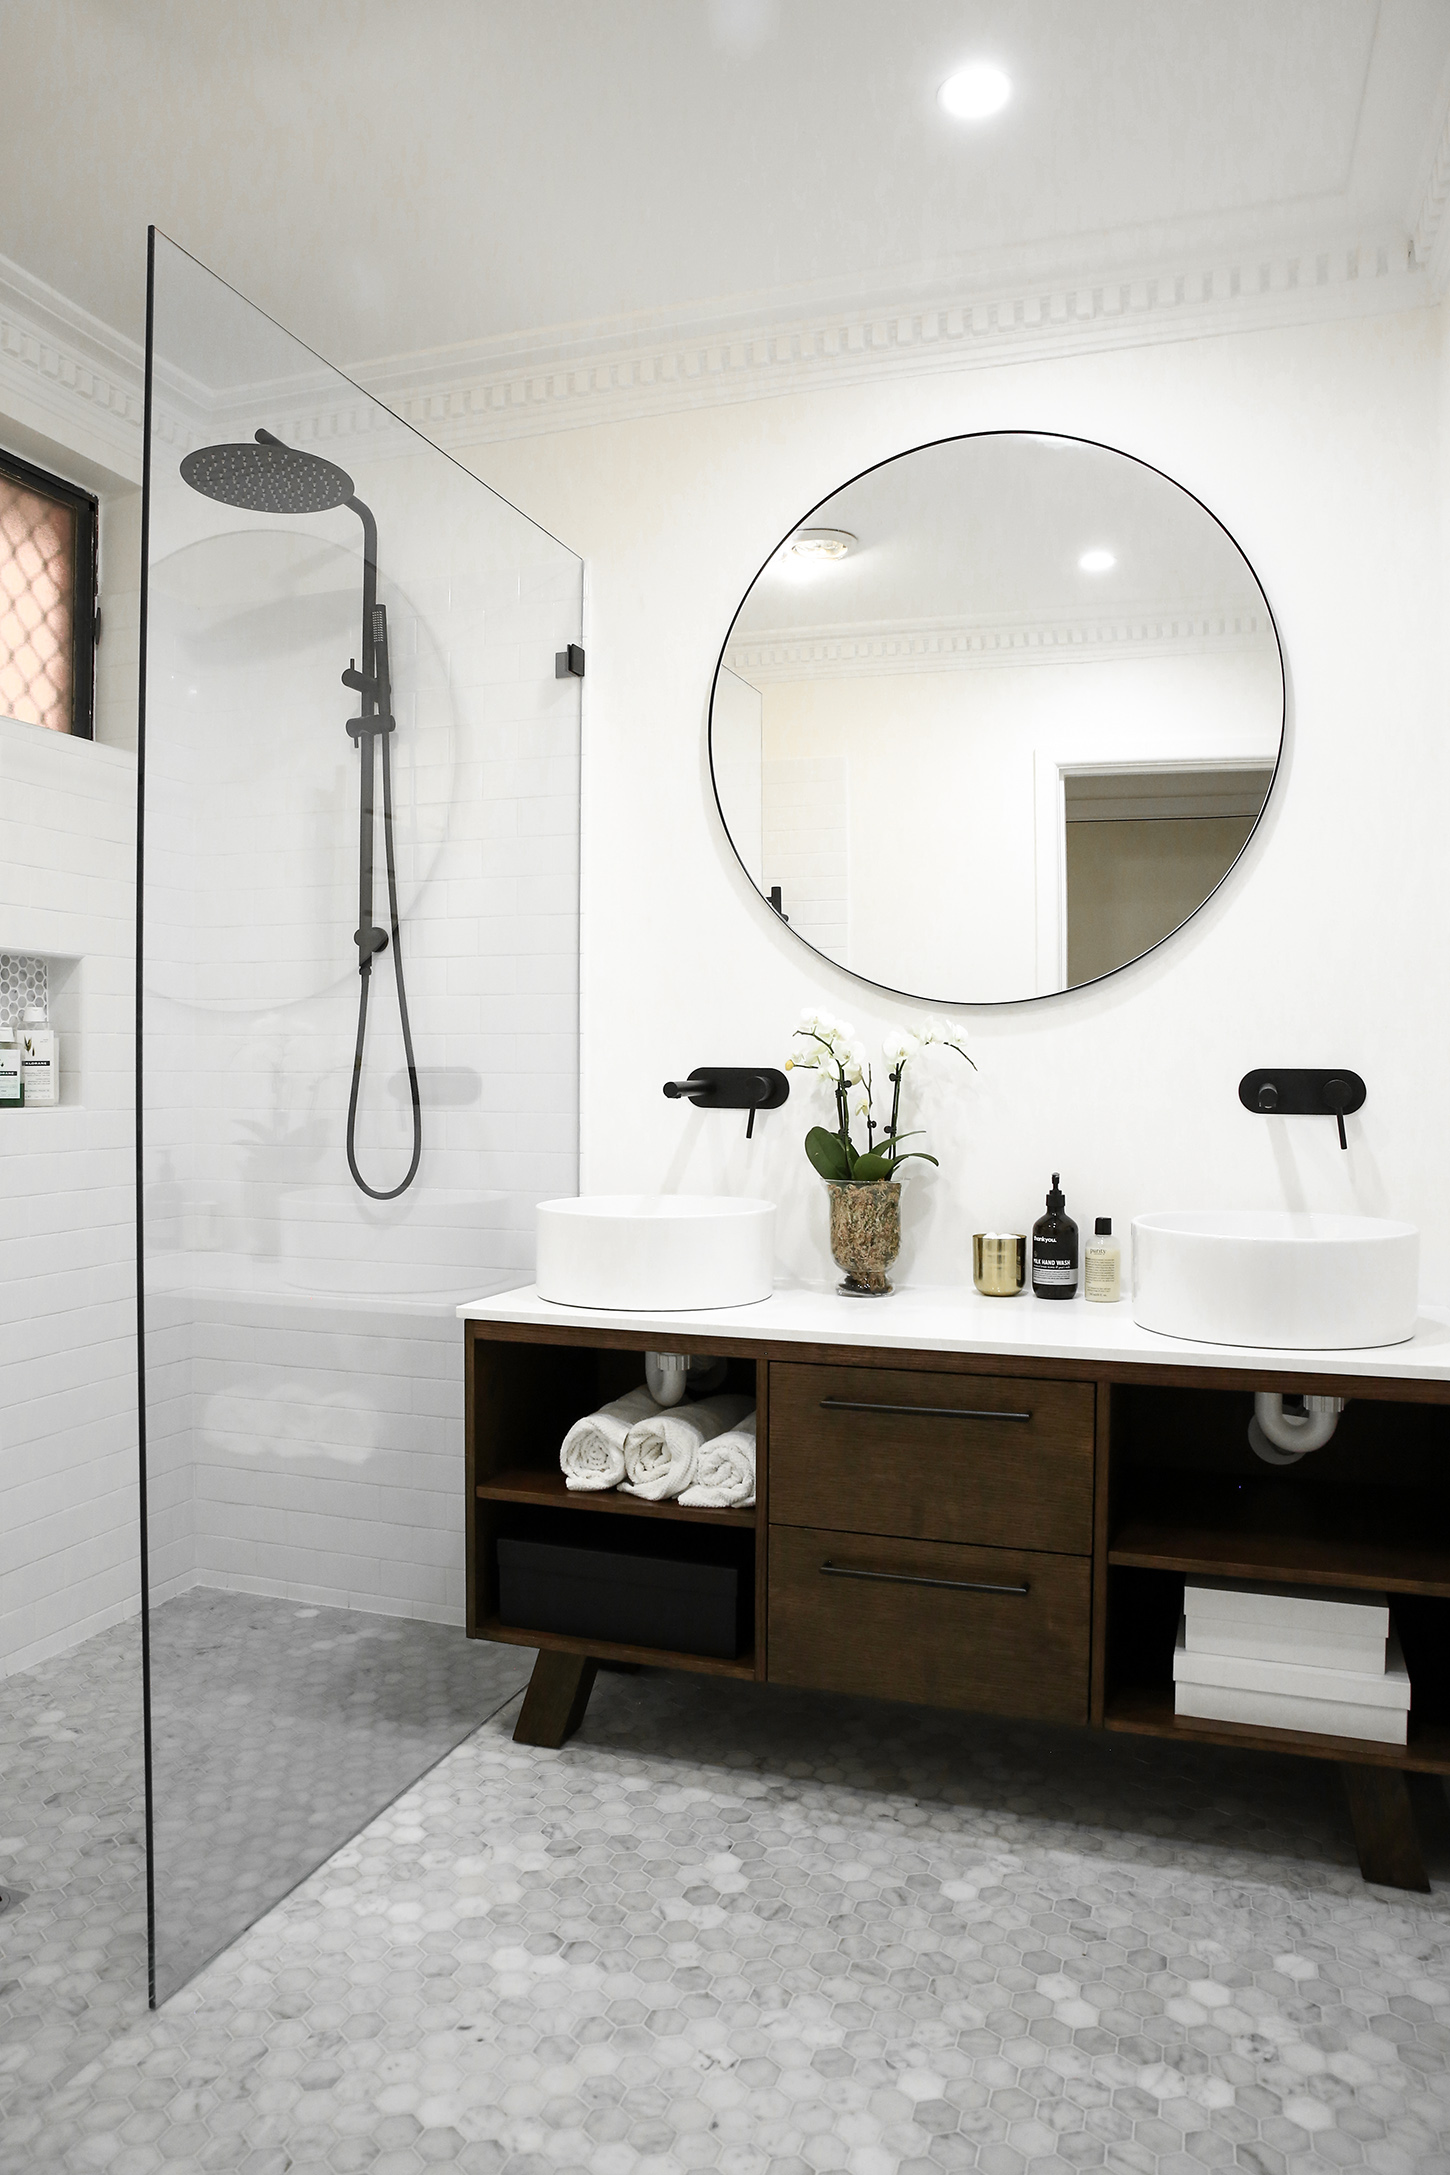 Our Bathroom Renovation - Before & After | Mademoiselle | A Minimalist  Fashion Blog